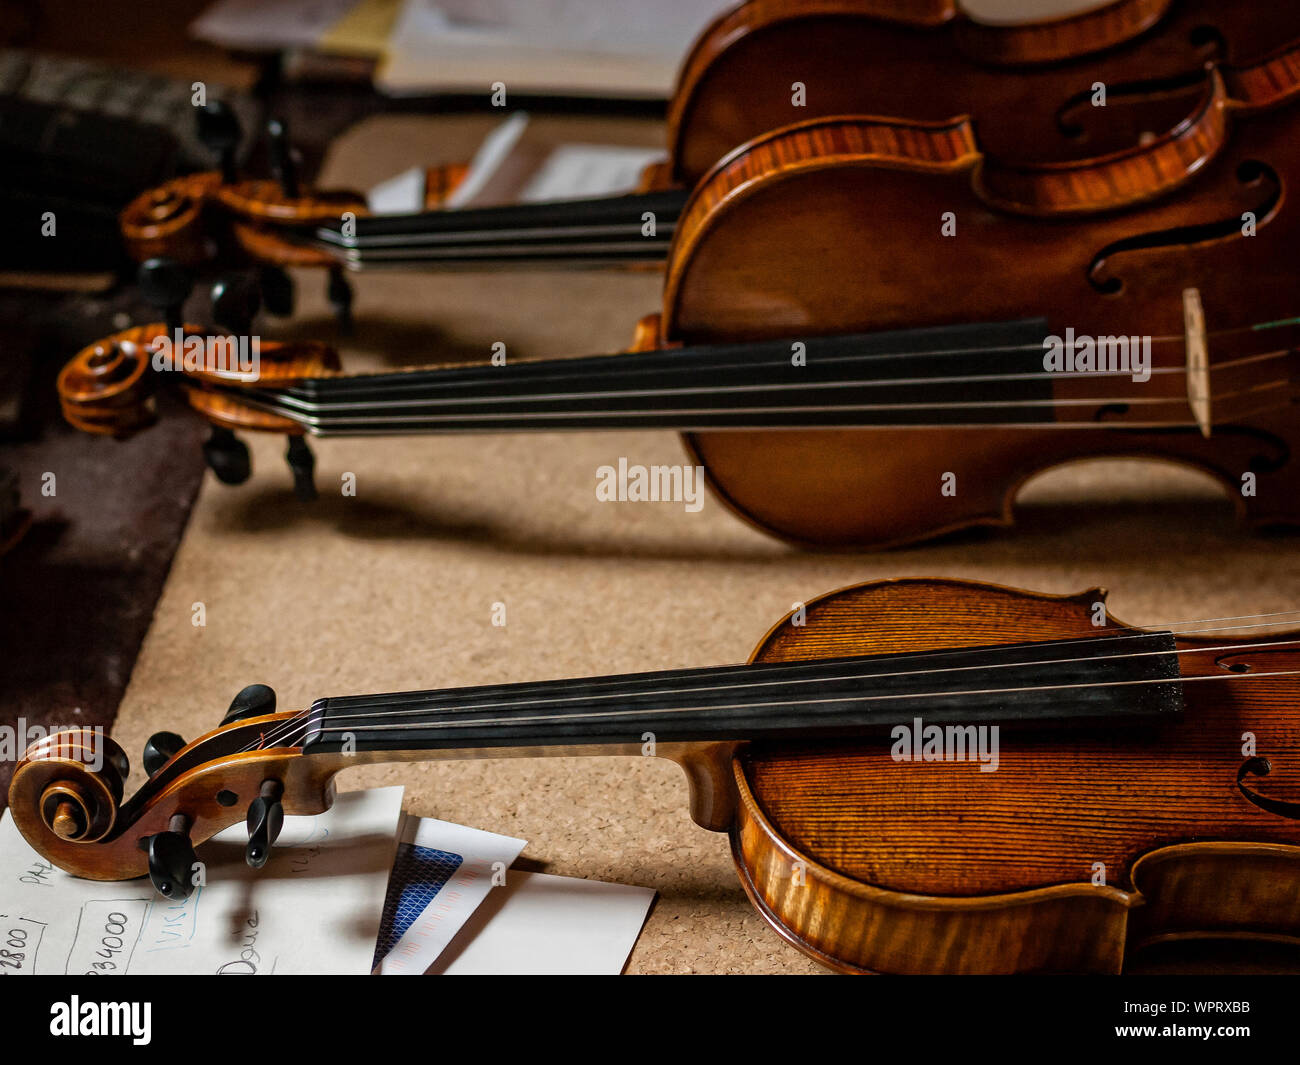 Violins On Table Stock Photo